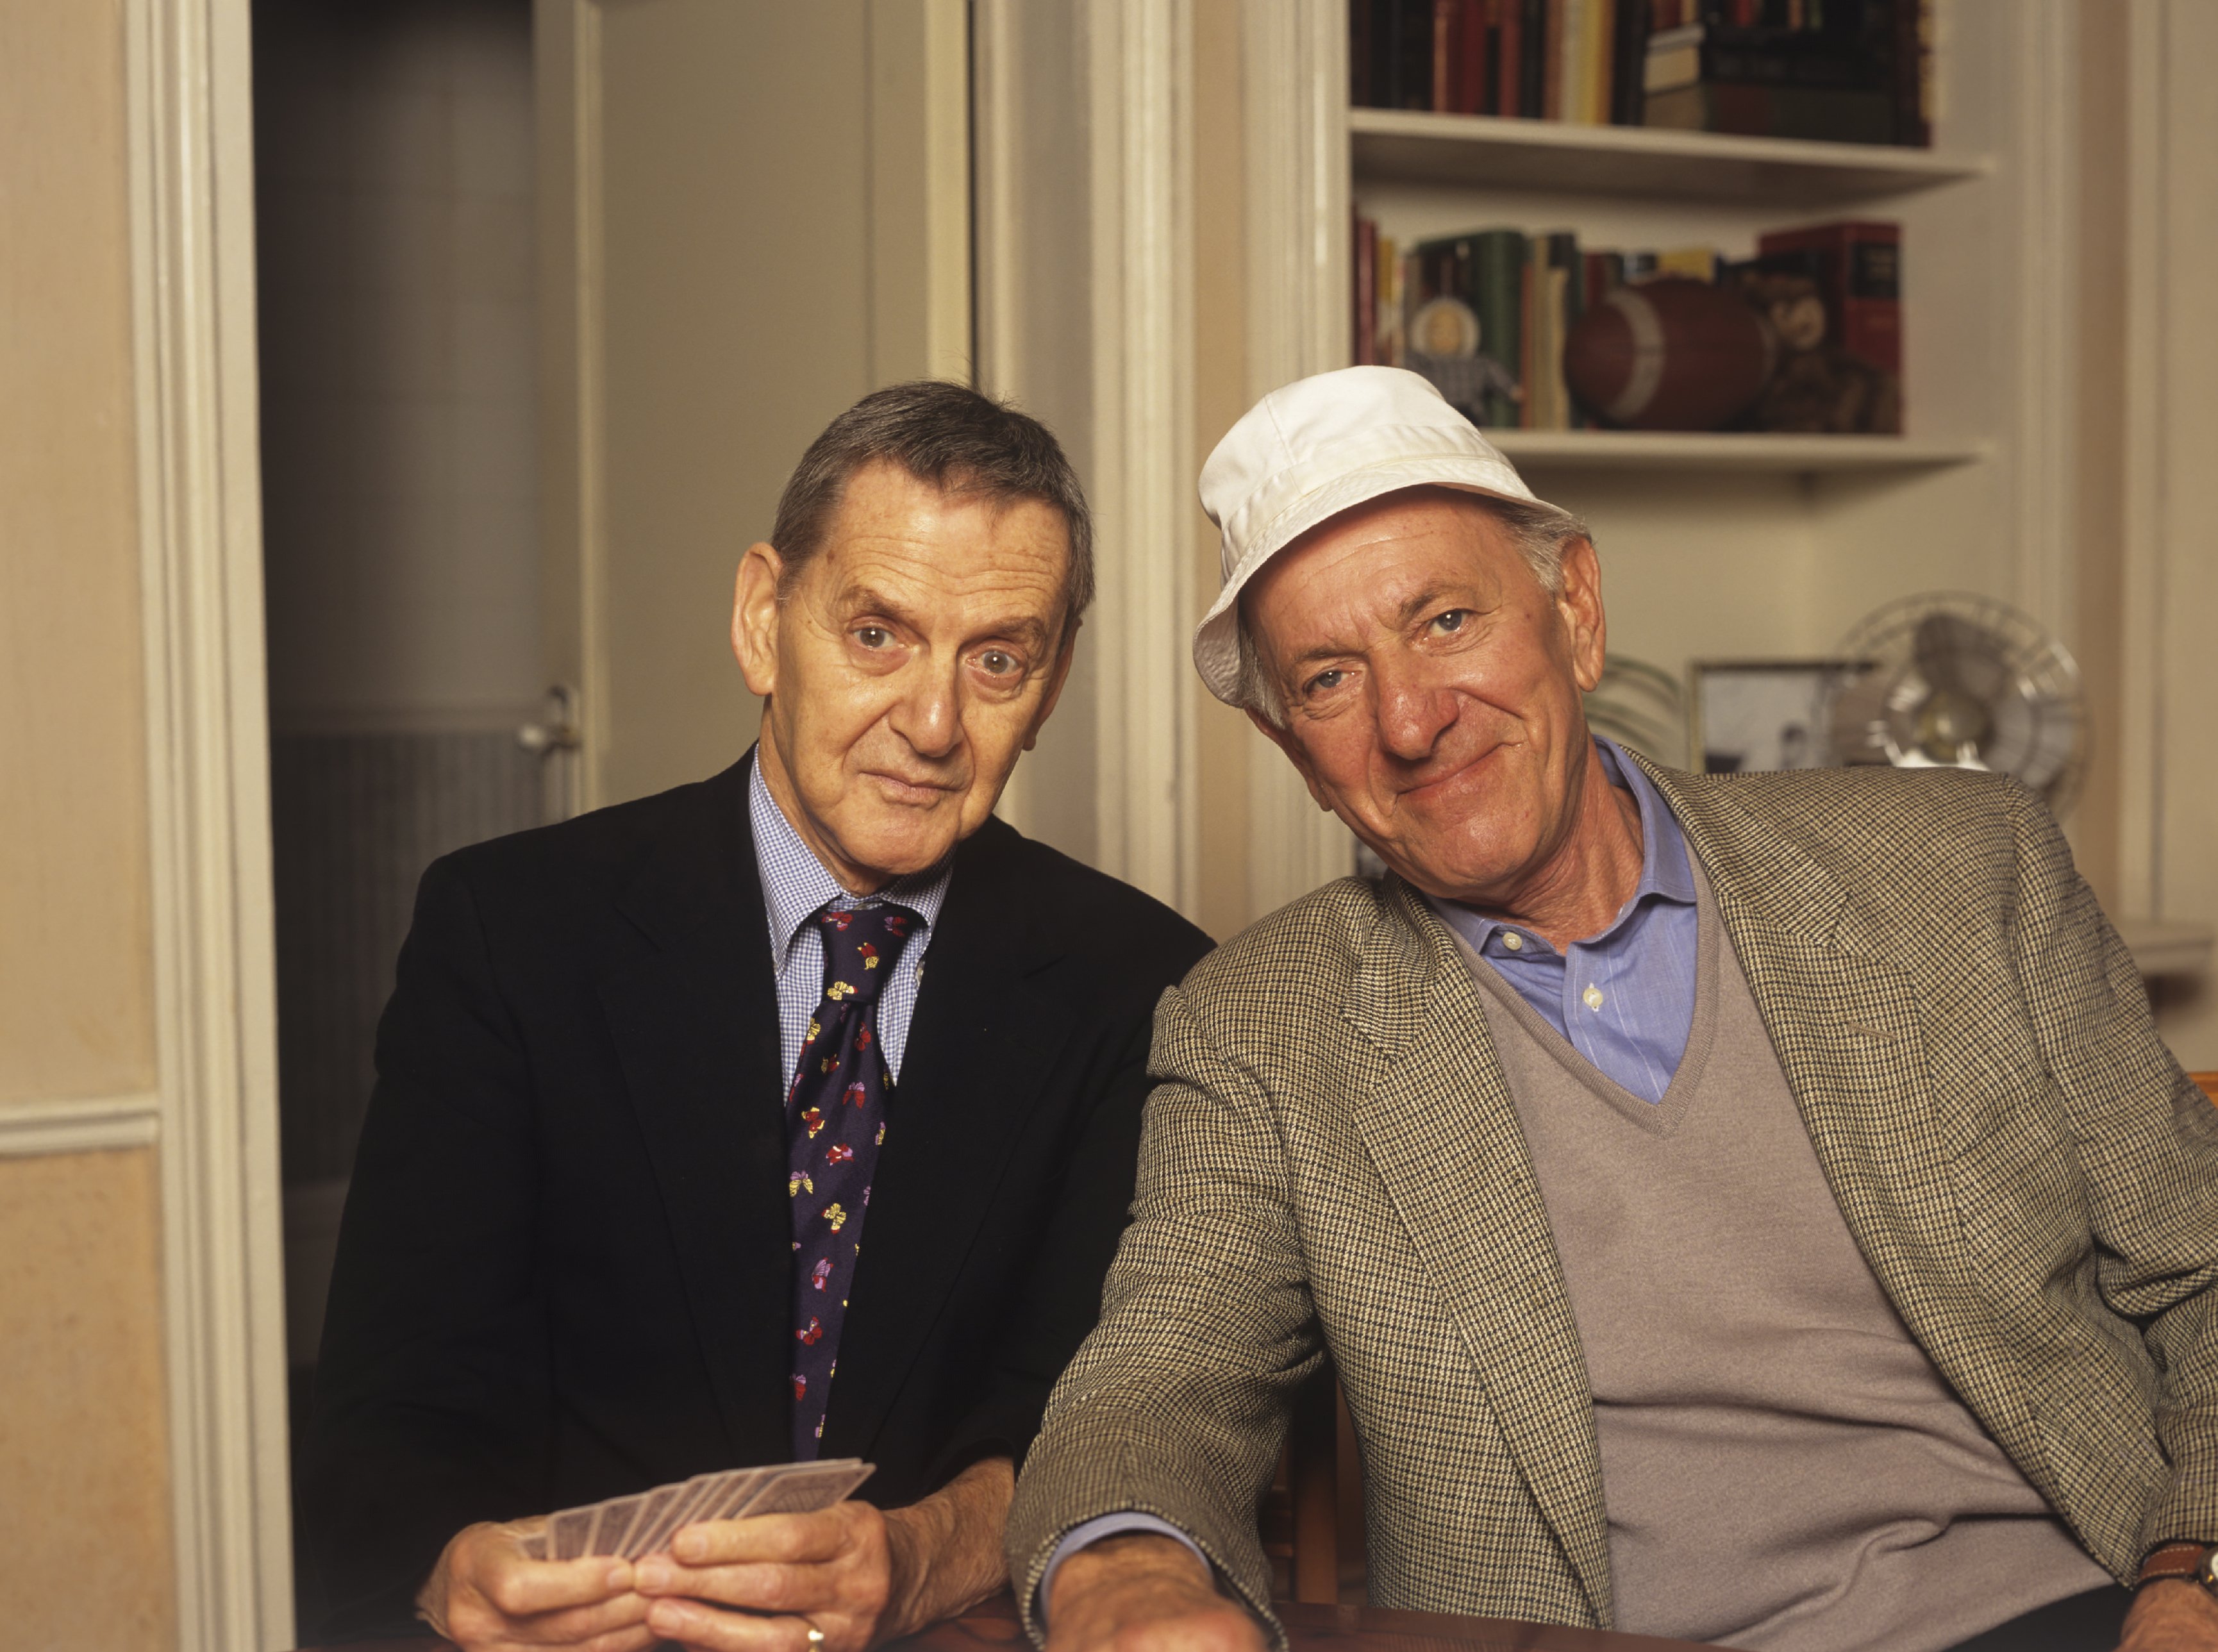 Actors Tony Randall and Jack Klugman 1993 | Photo: Getty Images